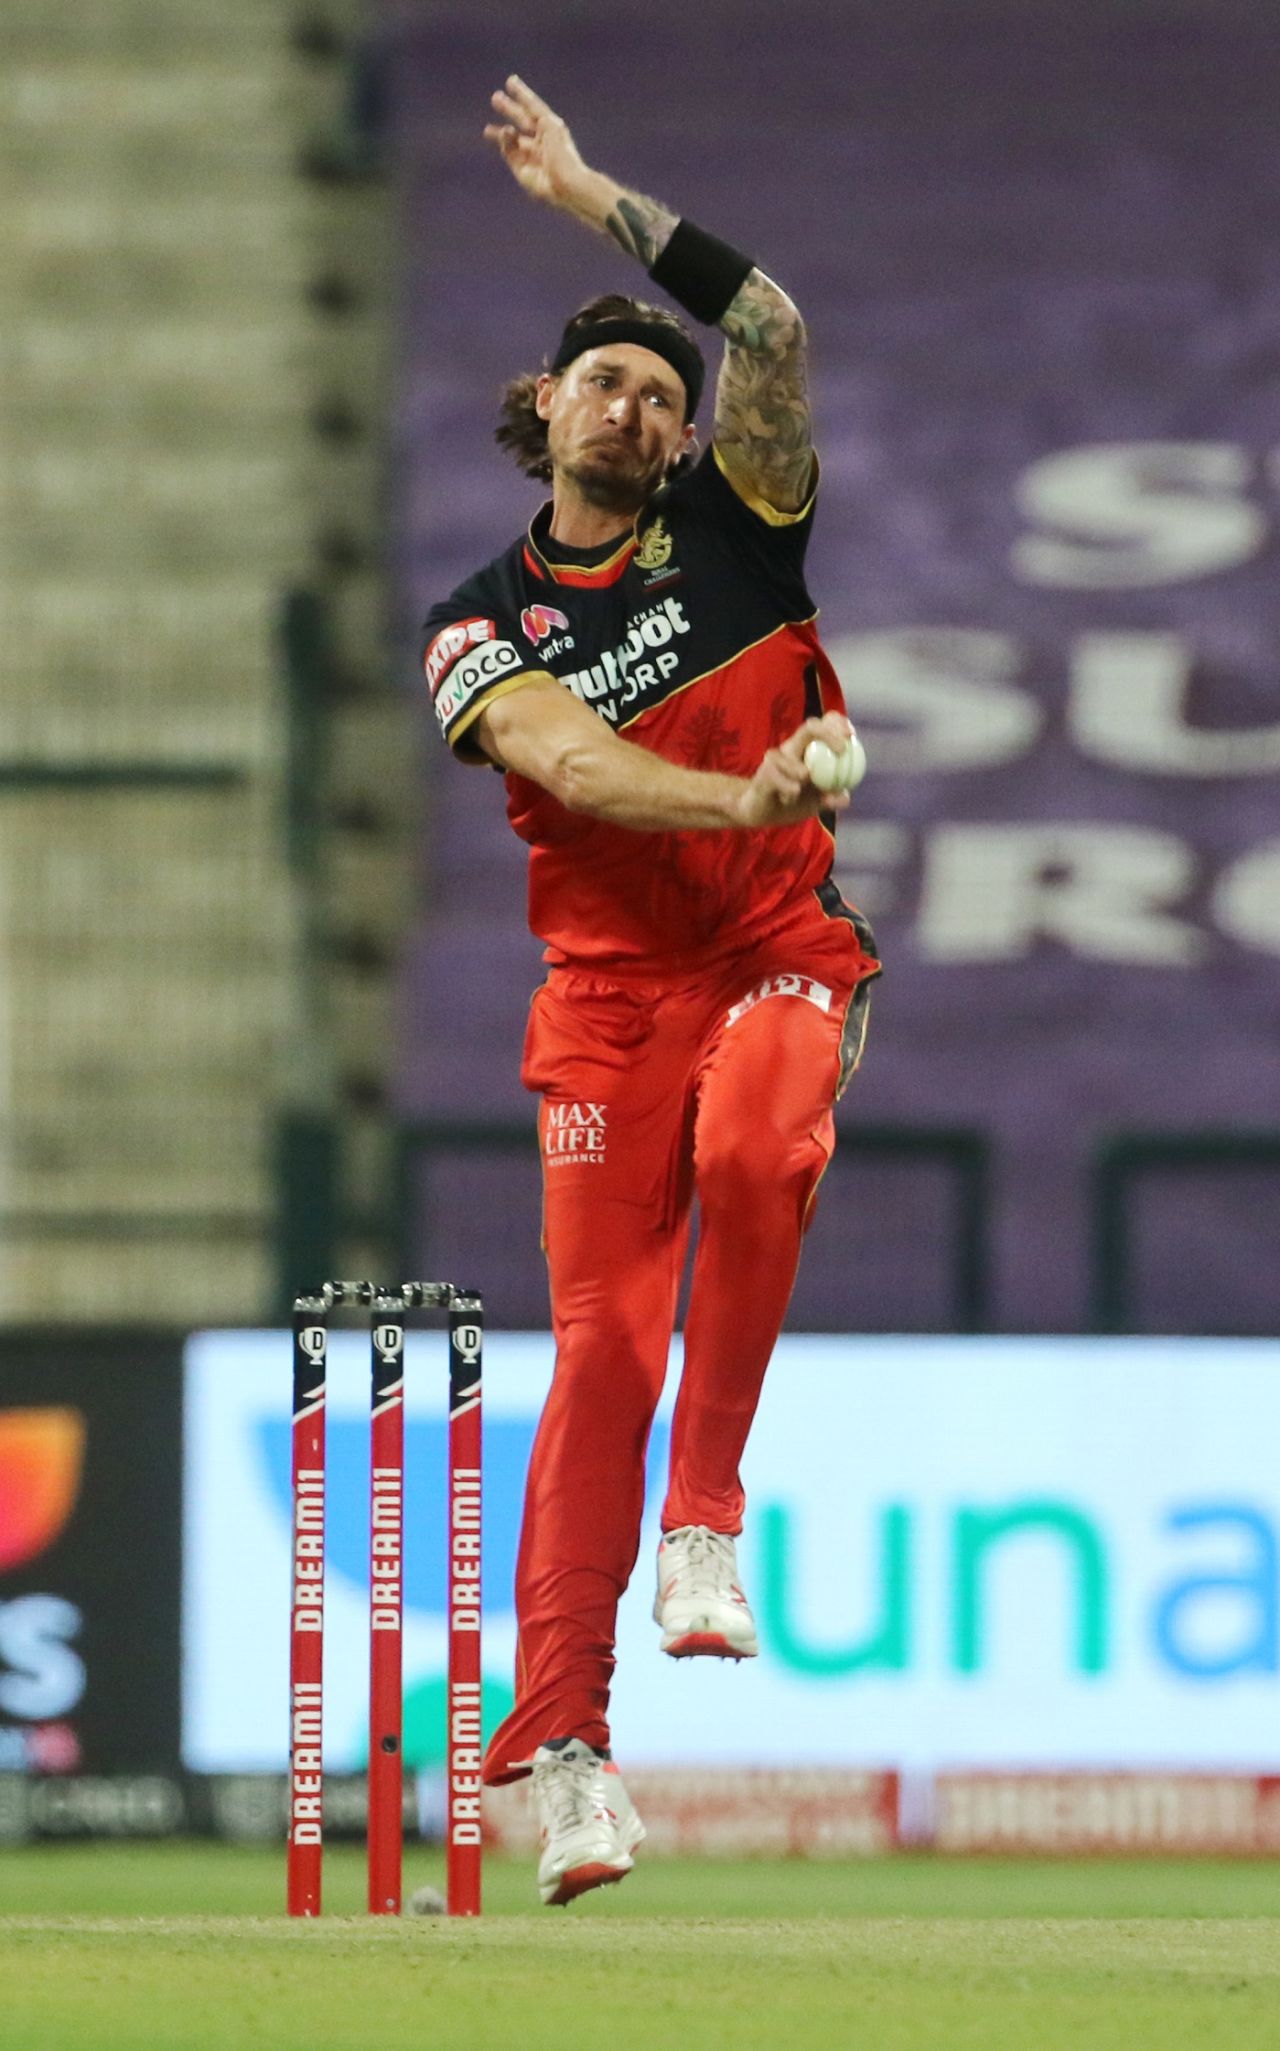 Dale Steyn was back in the XI after over a month, Mumbai Indians vs Royal Challengers Bangalore, IPL 2020, Abu Dhabi, October 28, 2020